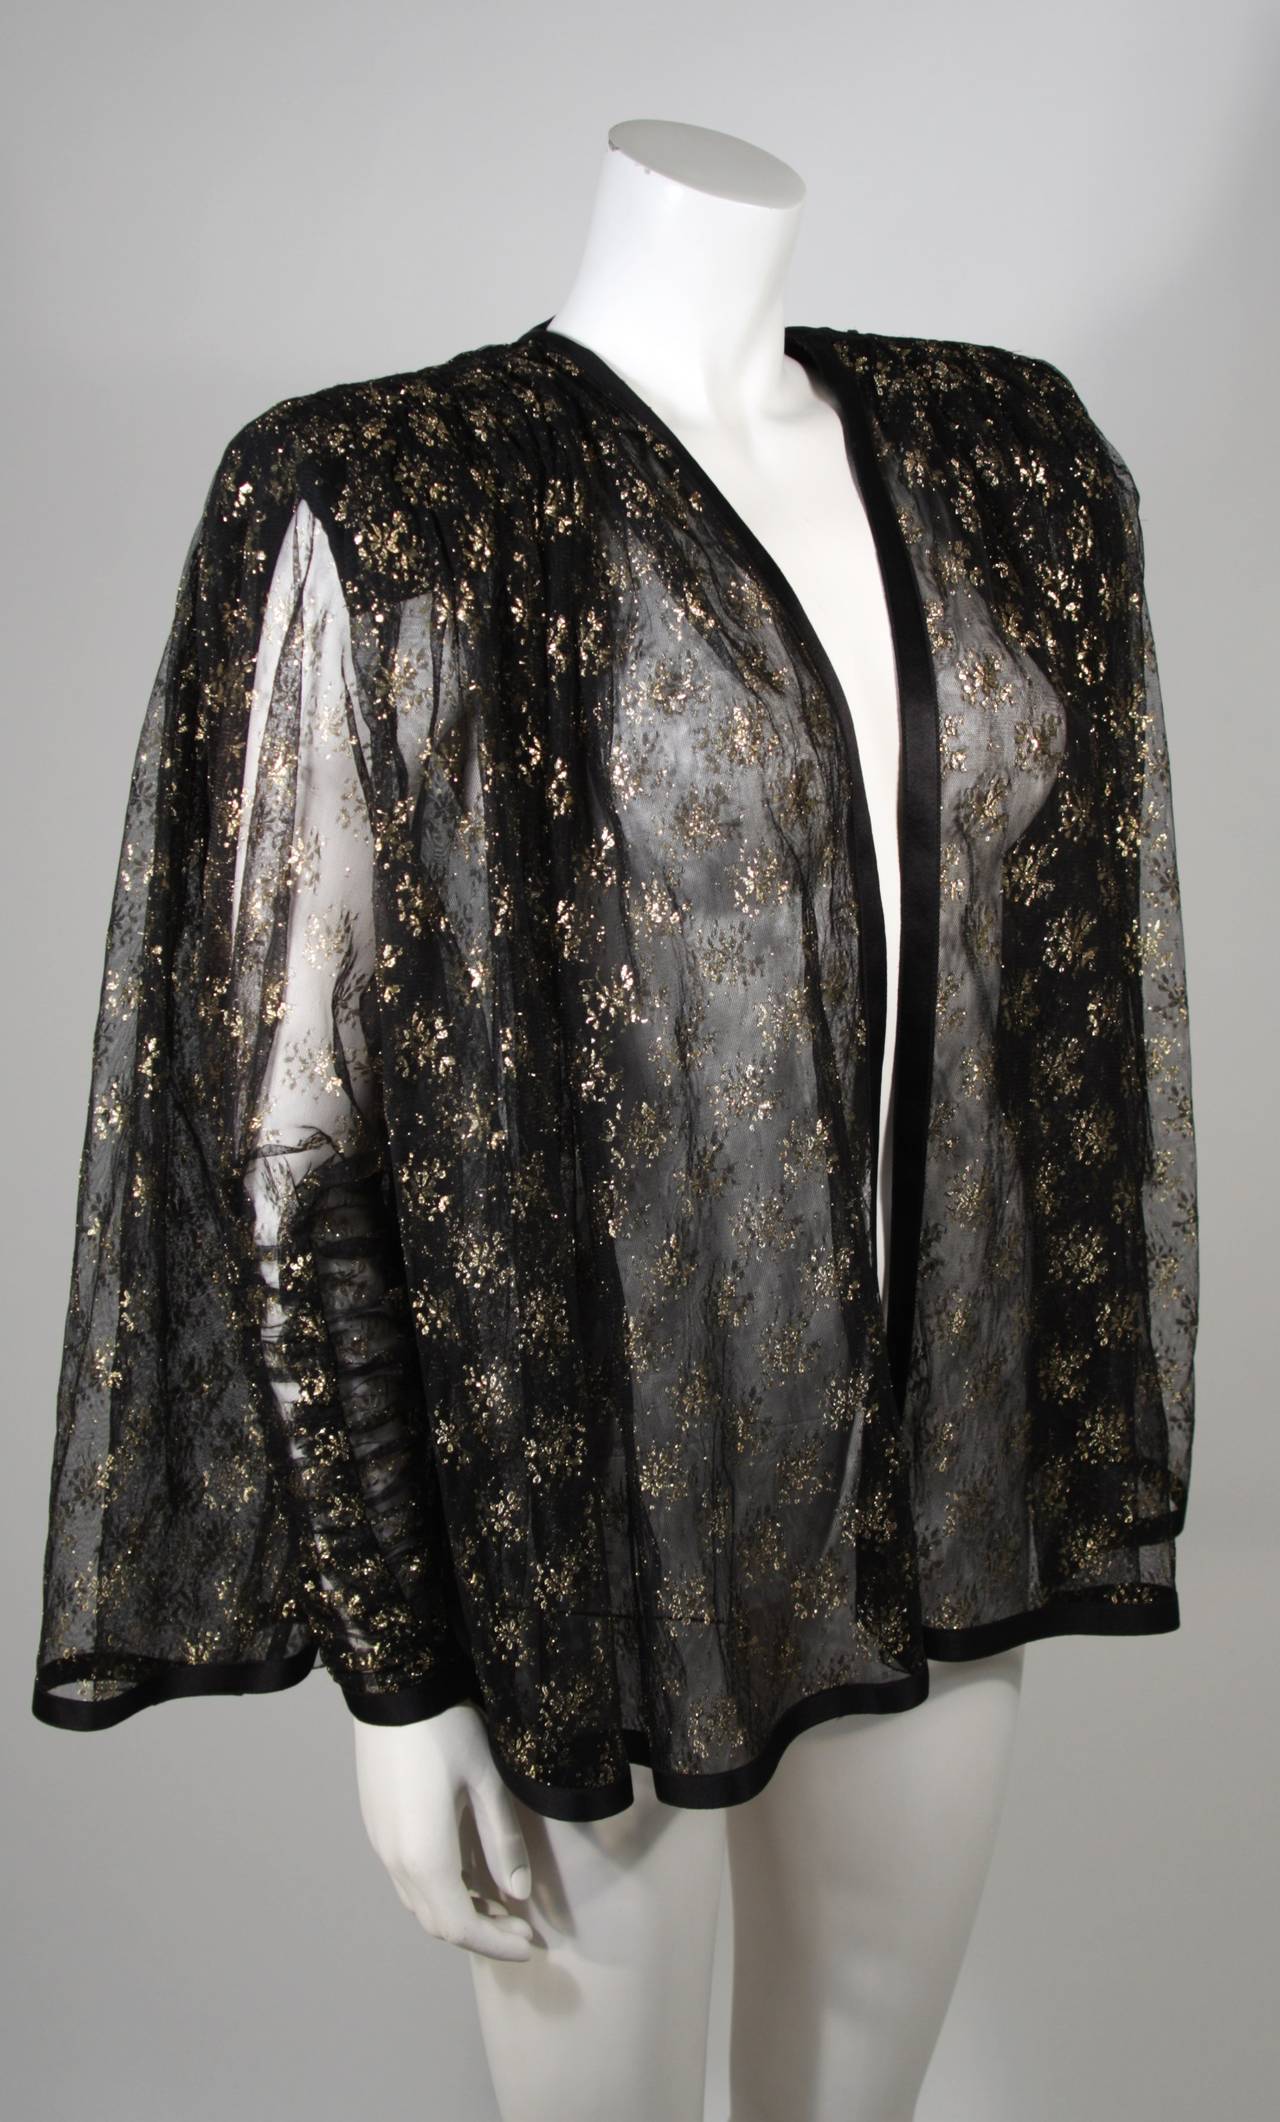 This design attributed to Galanos is available for viewing at our Beverly Hills Boutique. This dramatic multi-layered piece is fashioned from the finest sheer black fabric with gold metallic accents. The sleeves feature a zipper and are ruched. This